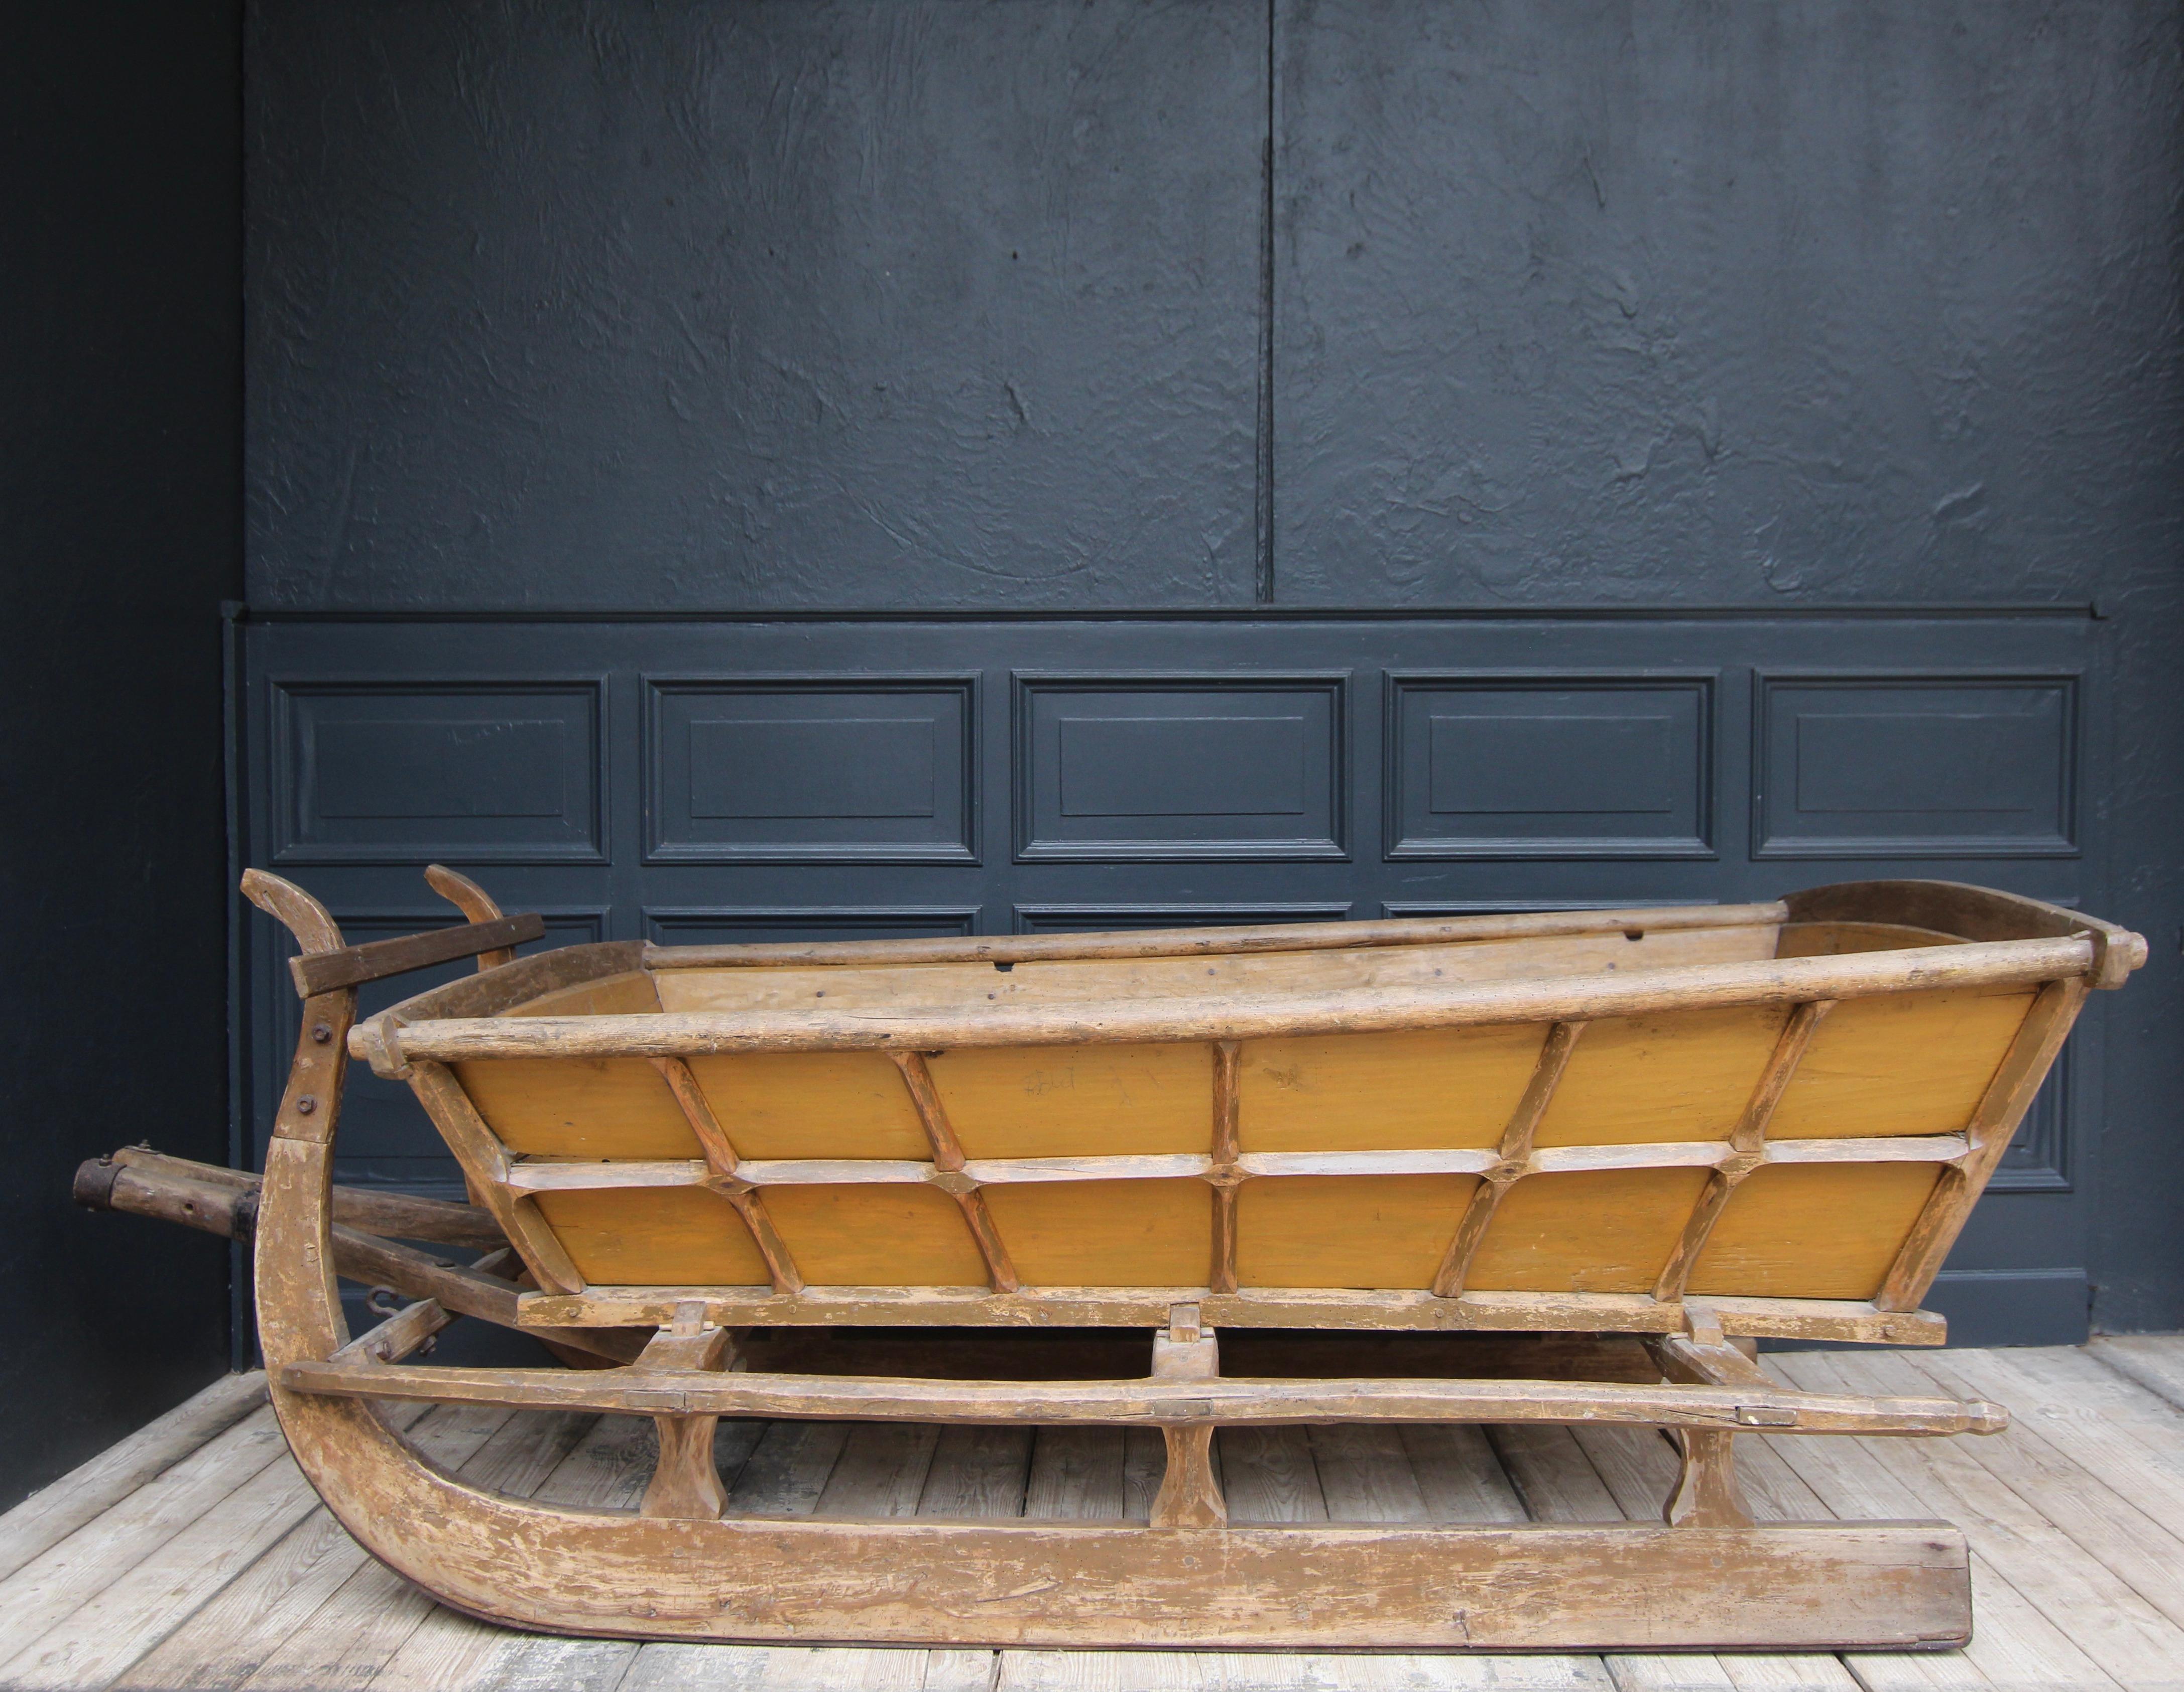 Large decorative german folk art horse-drawn sleigh from the late 19th century.

Dimensions: 
87 cm high / 34.25 inch high,
250 cm wide / 98.42 inch wide, 
106 cm deep / 41.73 inch deep.